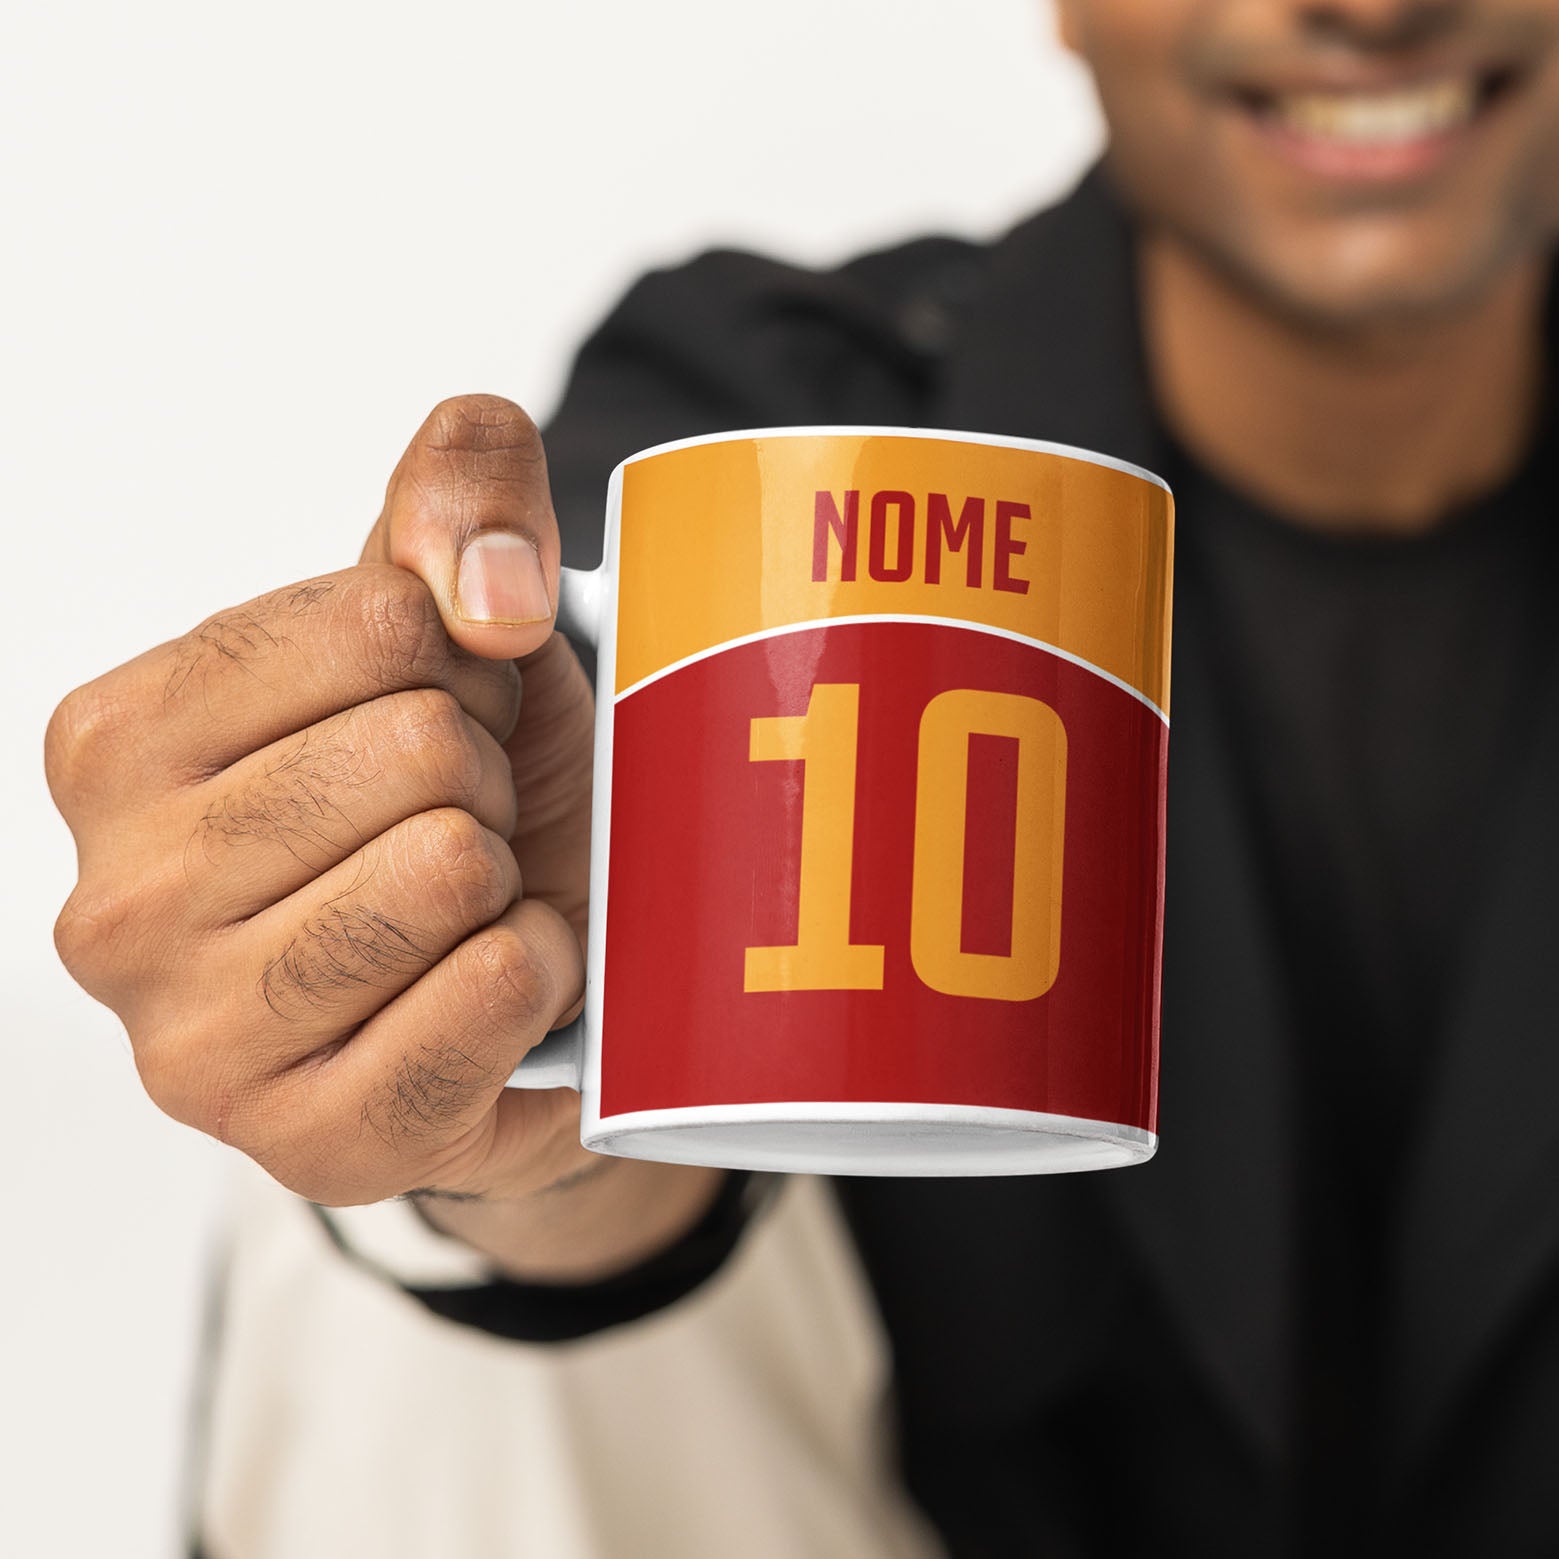 Roma mug personalized with name and number 